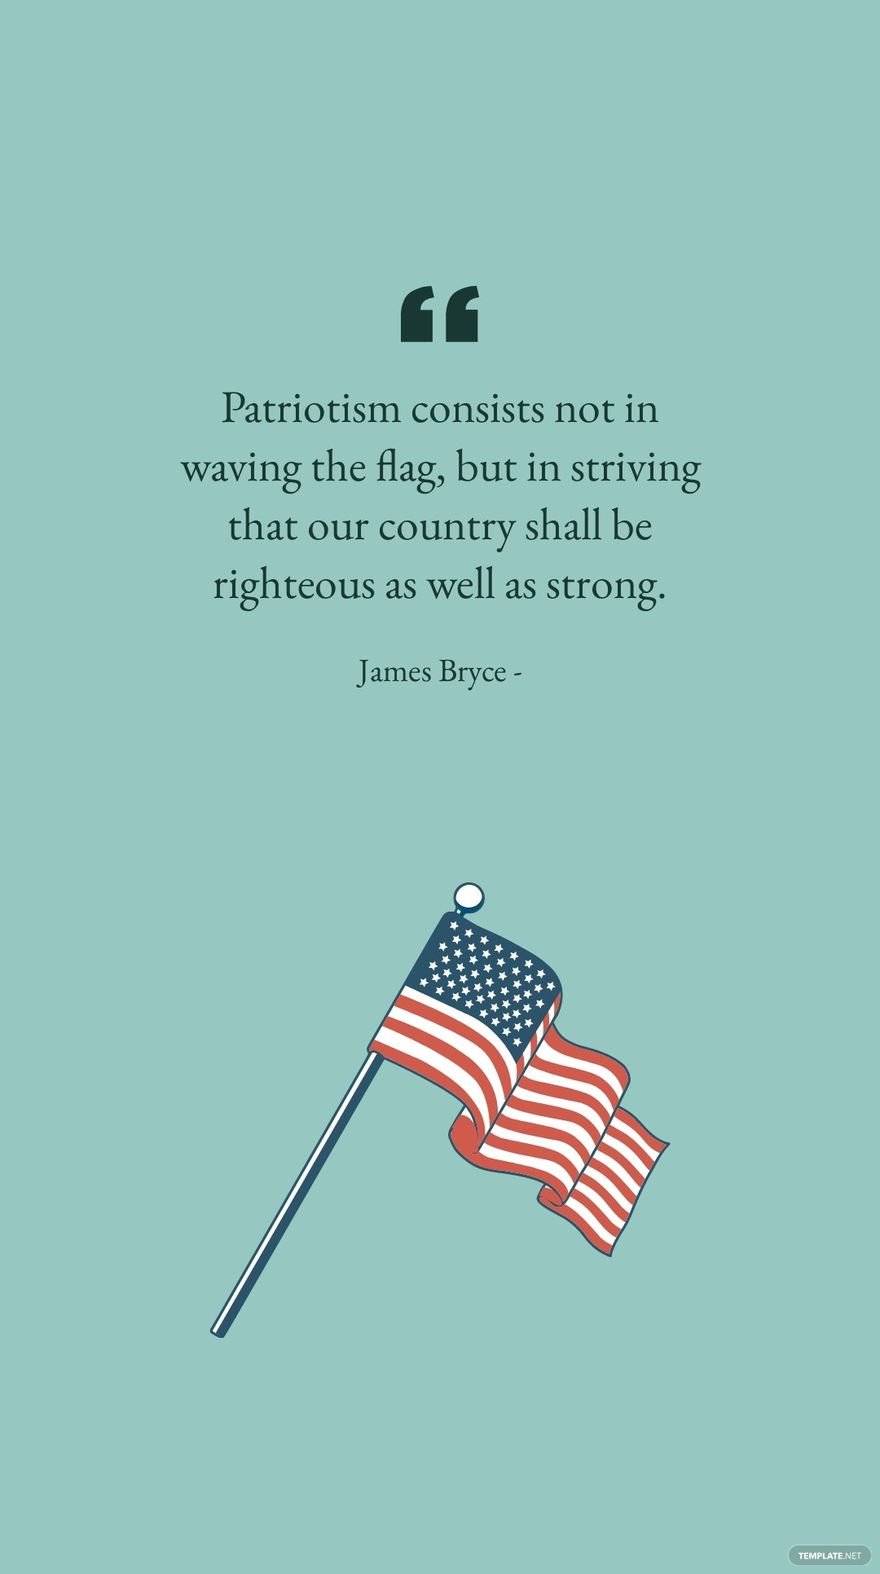 James Bryce - Patriotism consists not in waving the flag, but in striving that our country shall be righteous as well as strong. in JPG